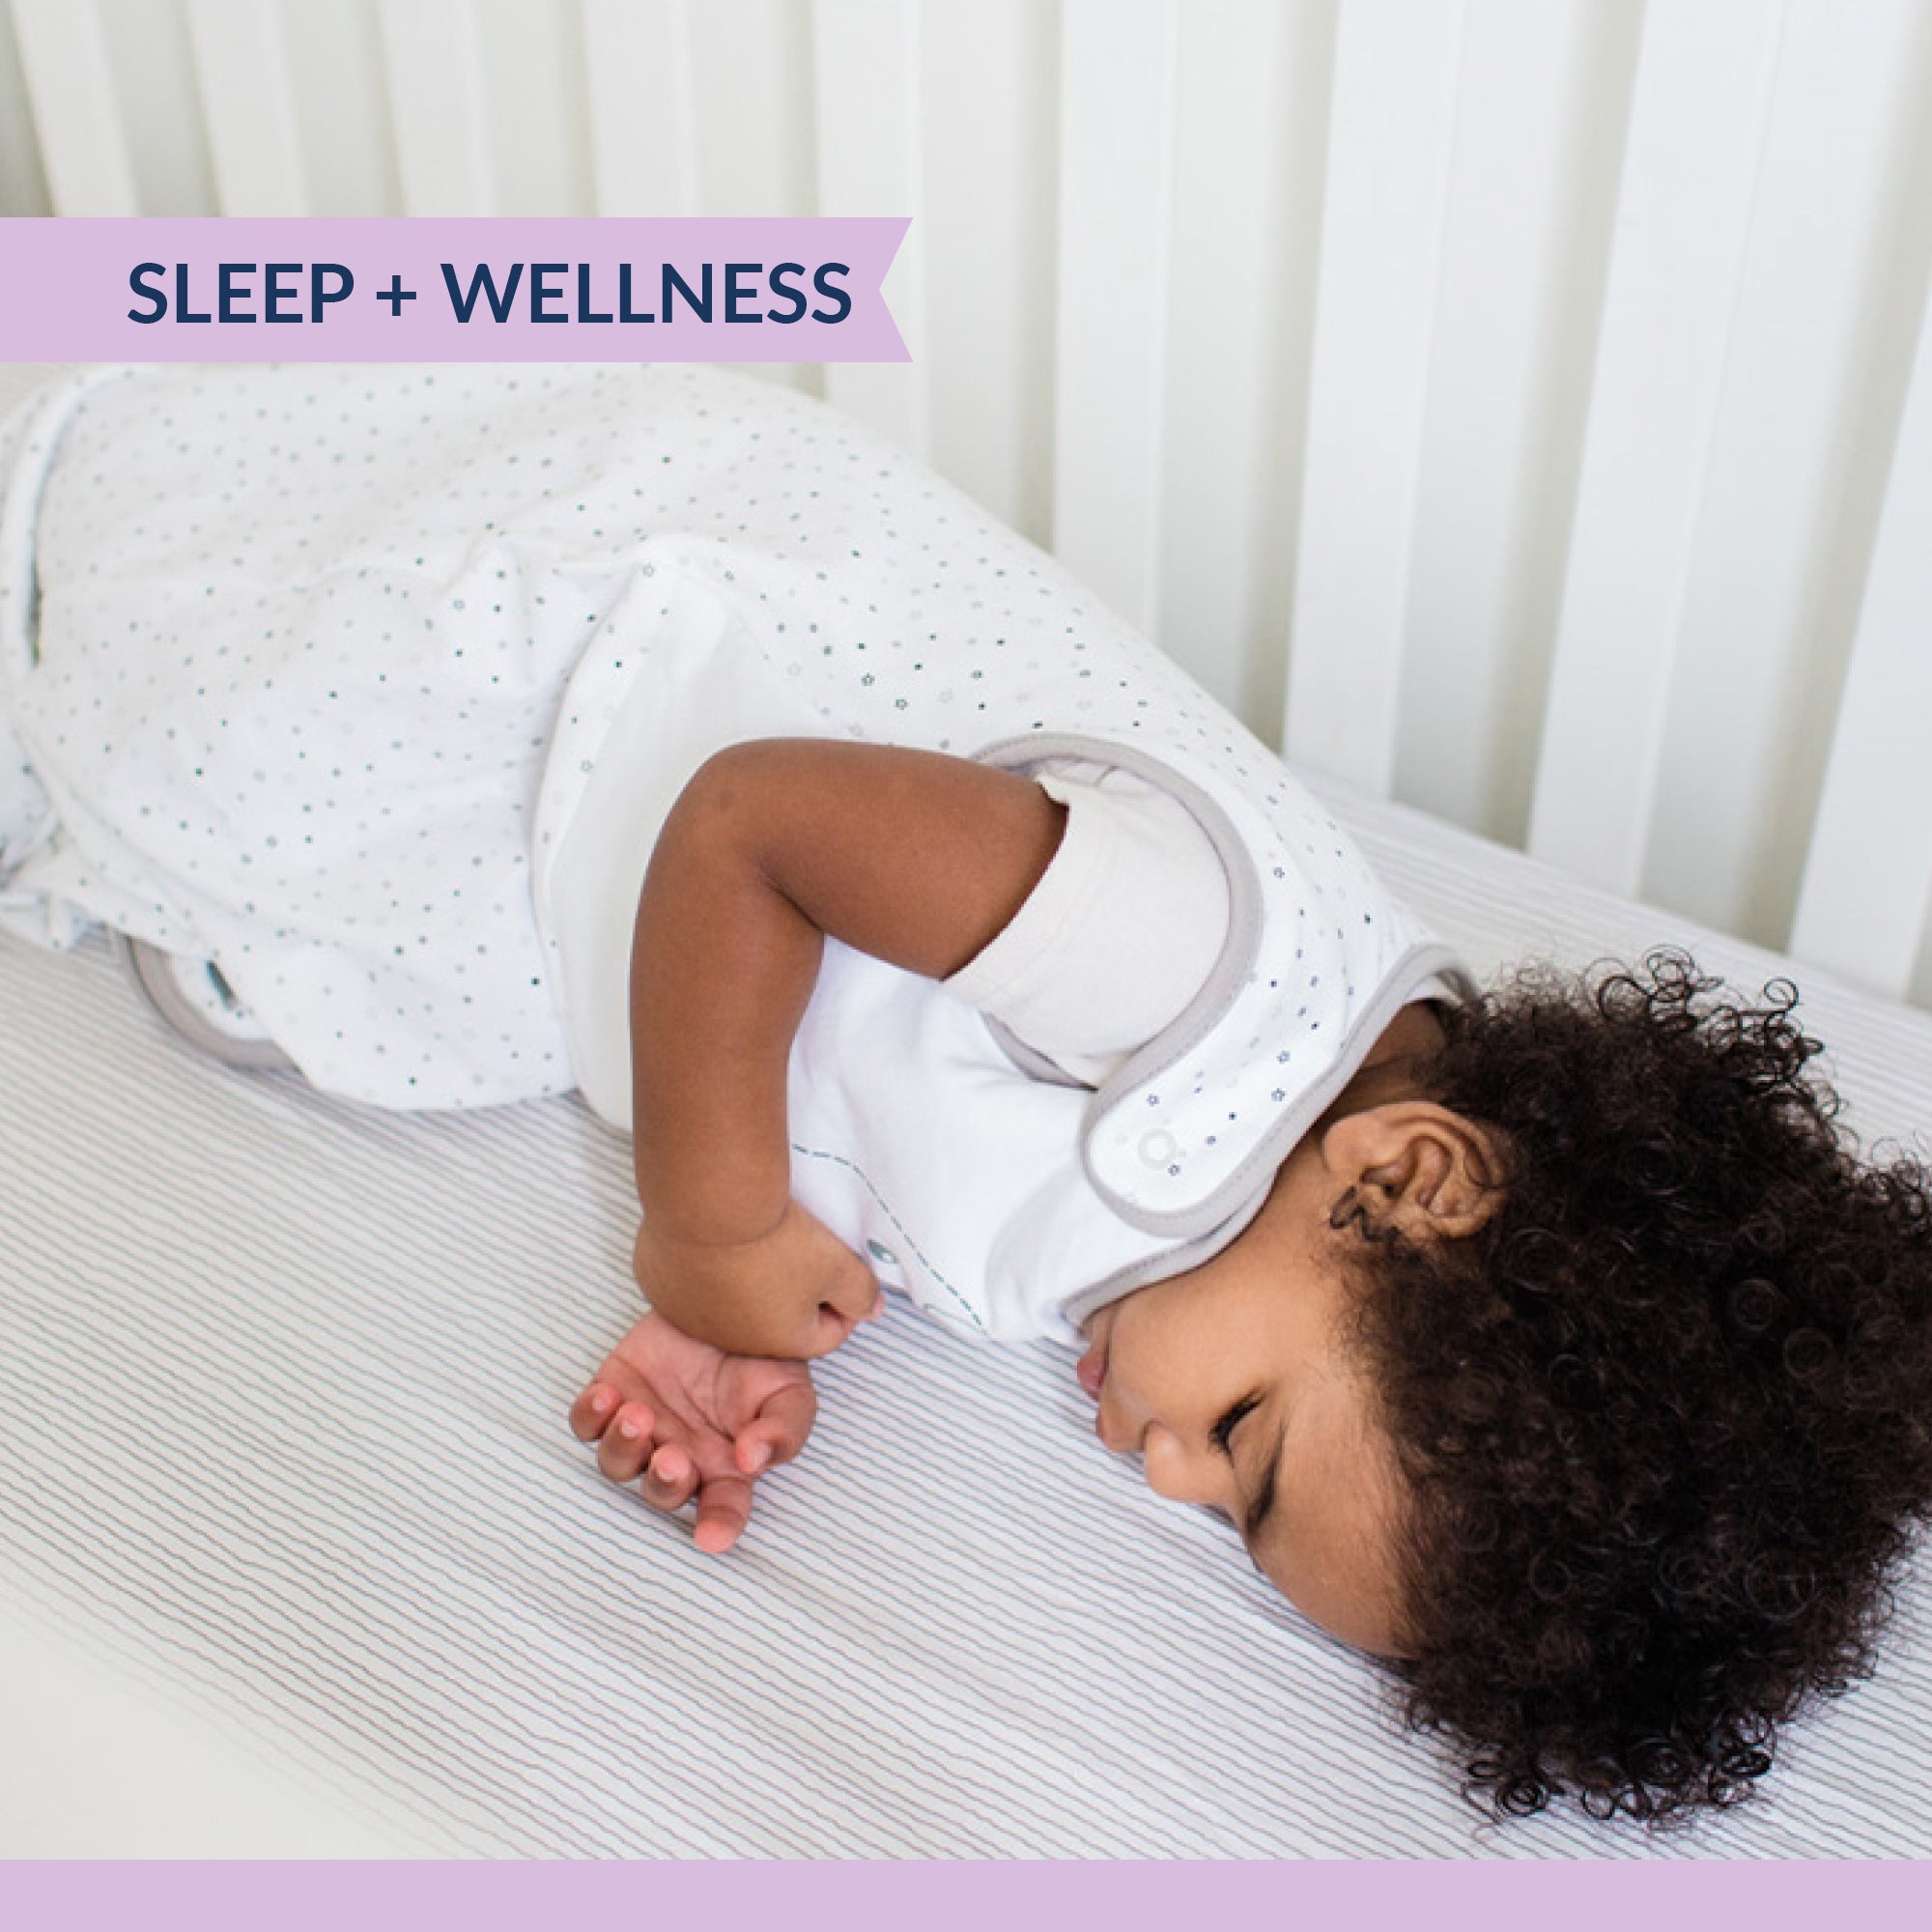 Baby rolling over in sleep: What to do and safe sleeping tips